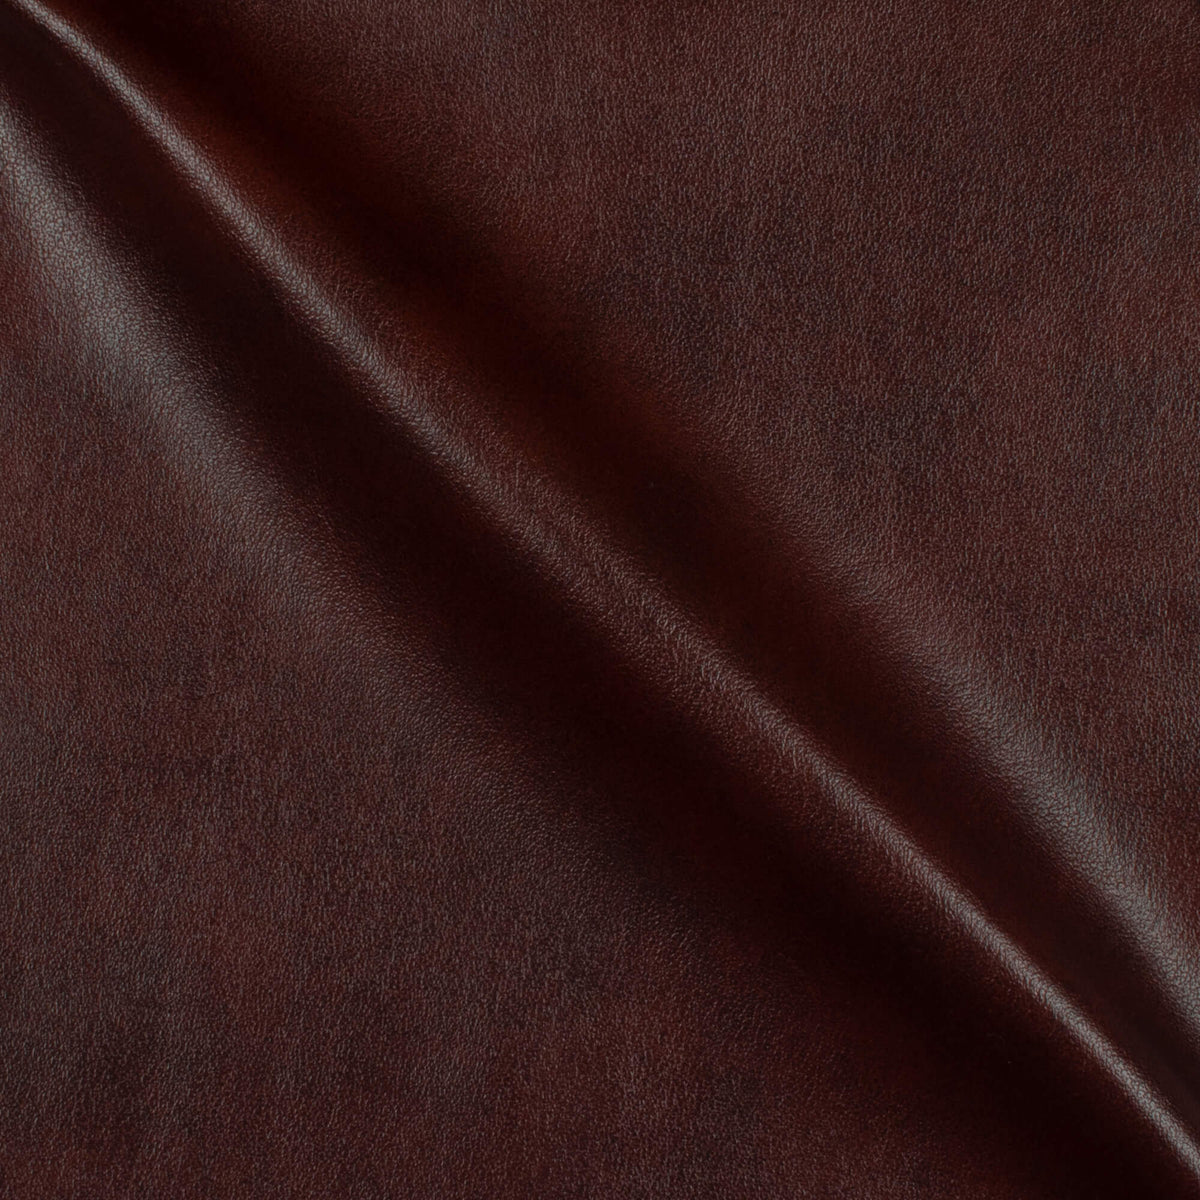 Seal Brown Self Textured Exclusive Sofa Fabric (Width 54 Inches)